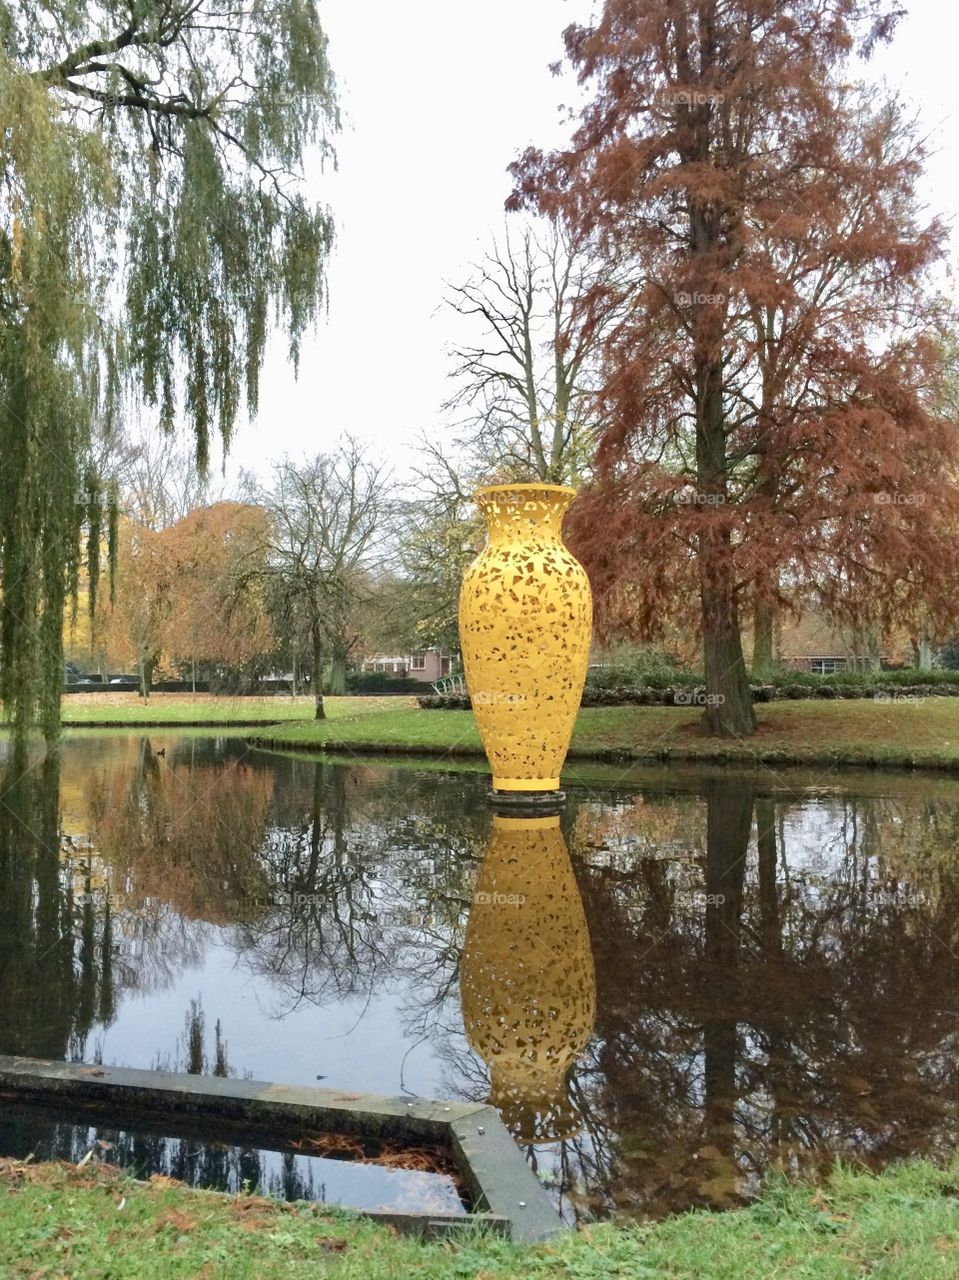 A yelow vase in a parc